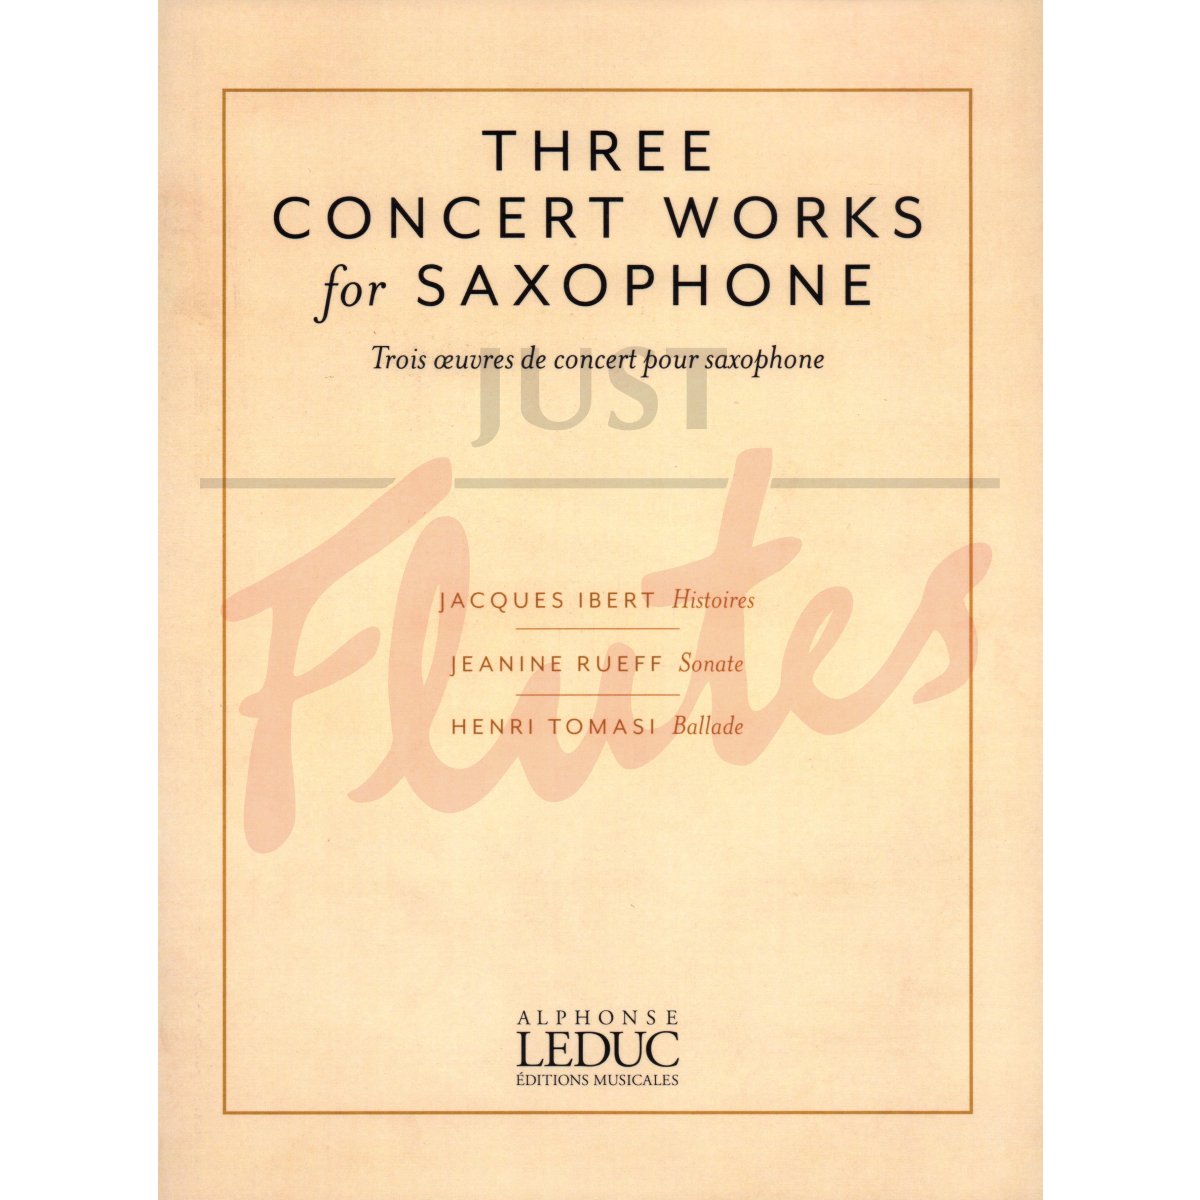 Three Concert Works for Saxophone